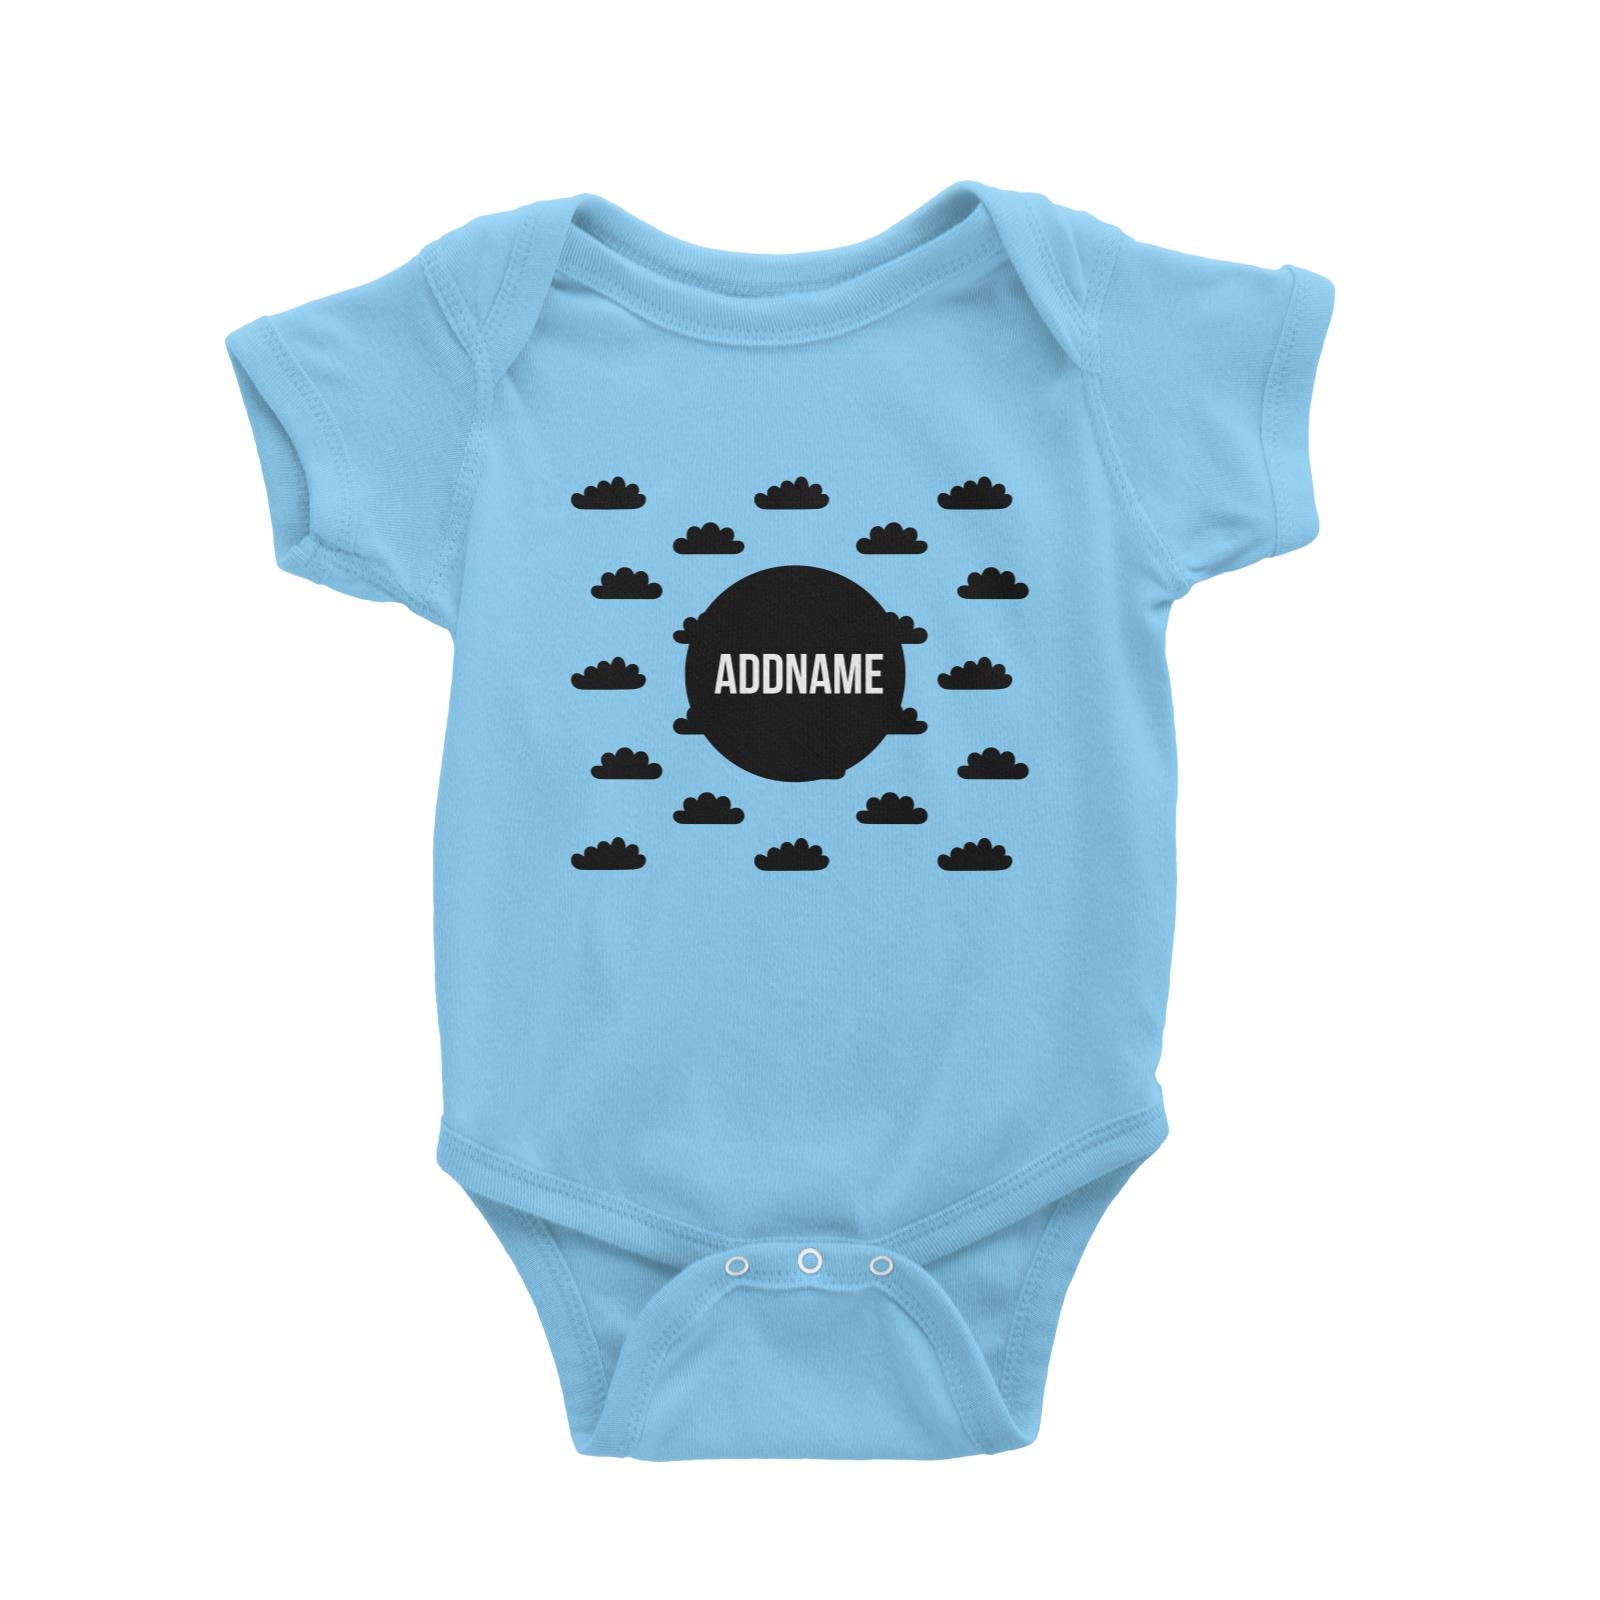 Monochrome Black Circle with Clouds Addname Baby Romper